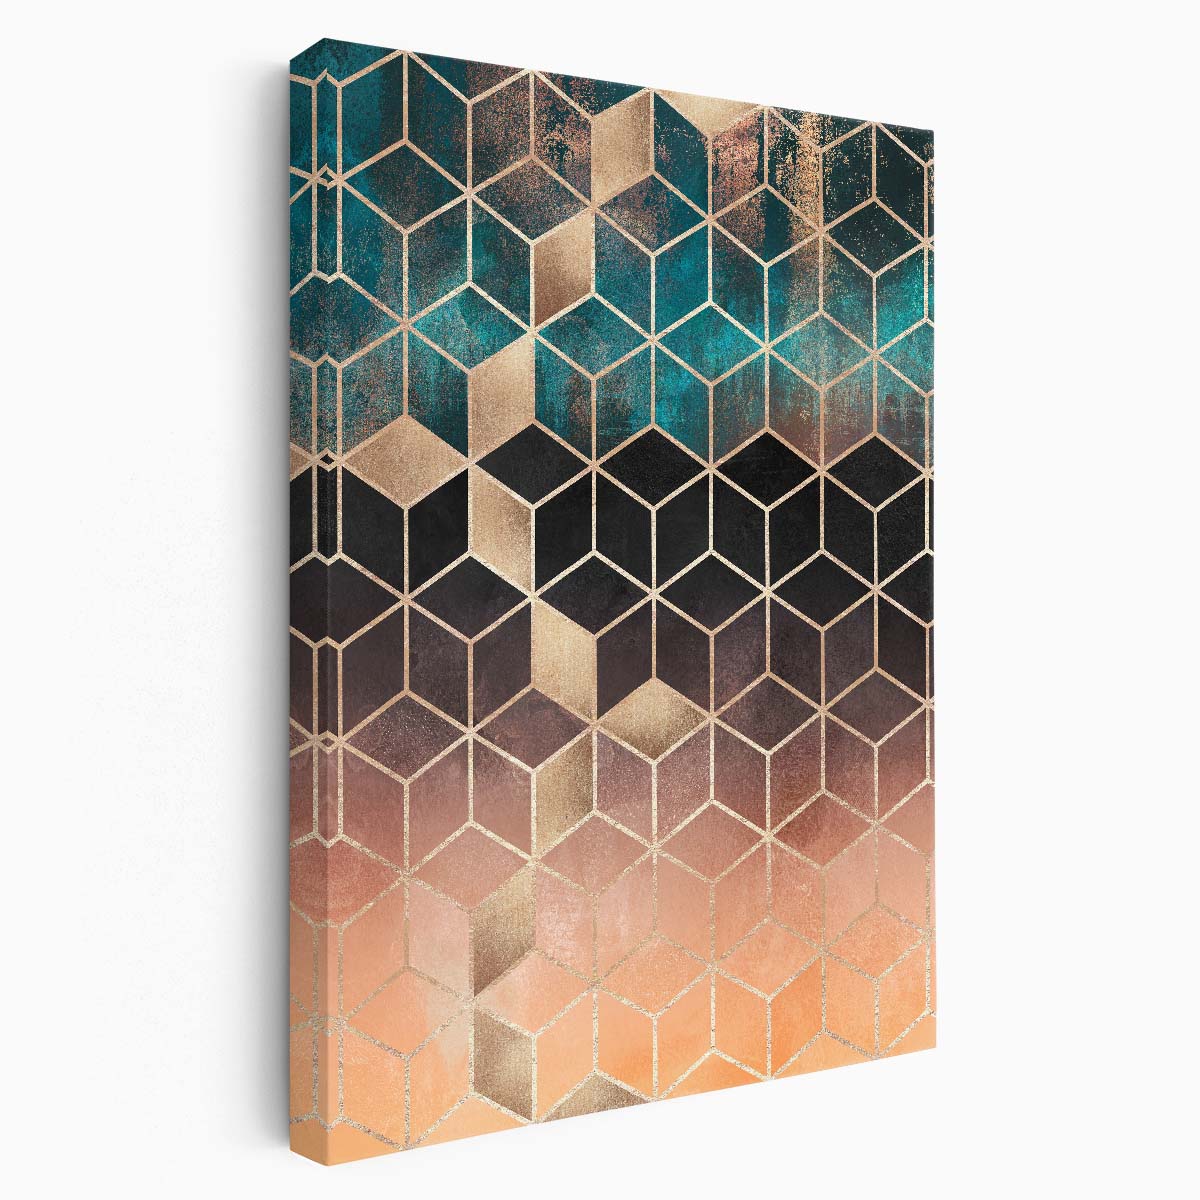 Golden Ombre Cube Illustration Colorful Geometric Mosaic Wall Art by Luxuriance Designs, made in USA